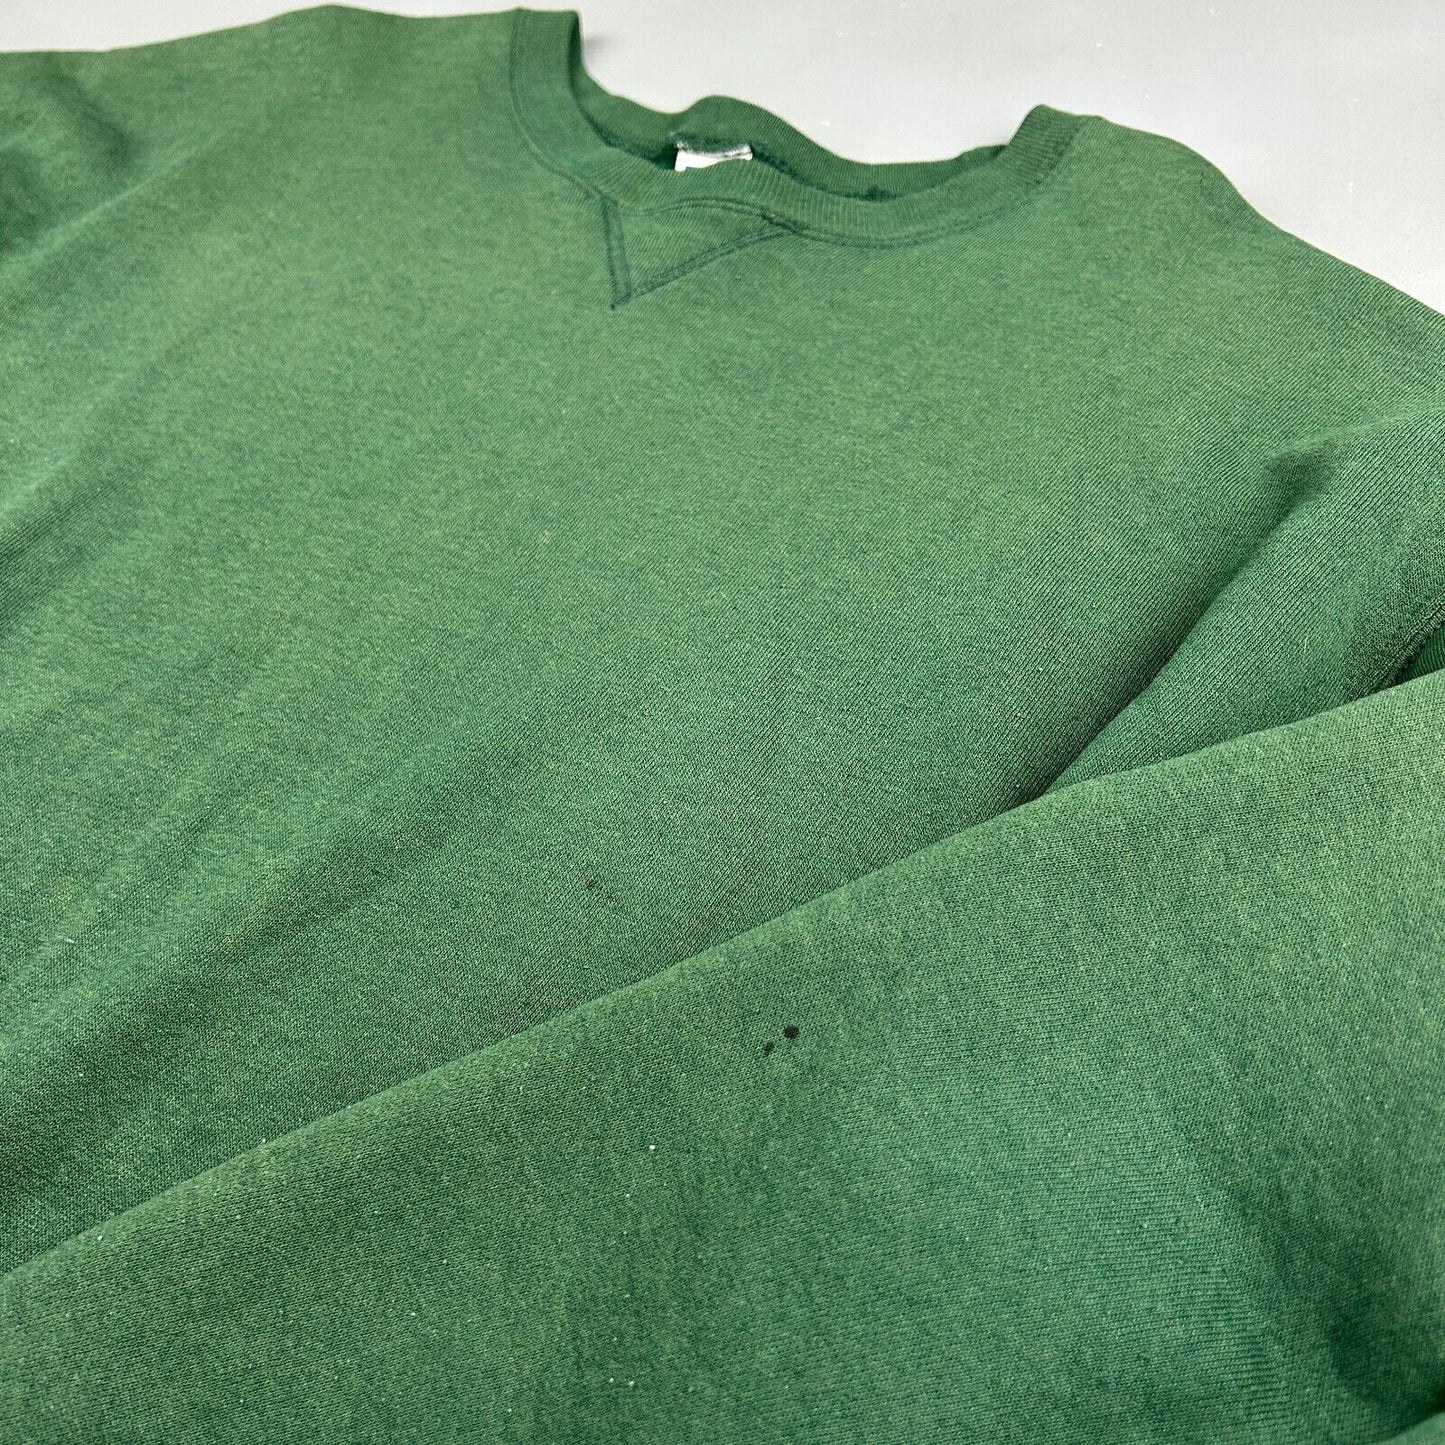 VINTAGE Russell Athletic Blank Green Crewneck Sweater sz XL Adult